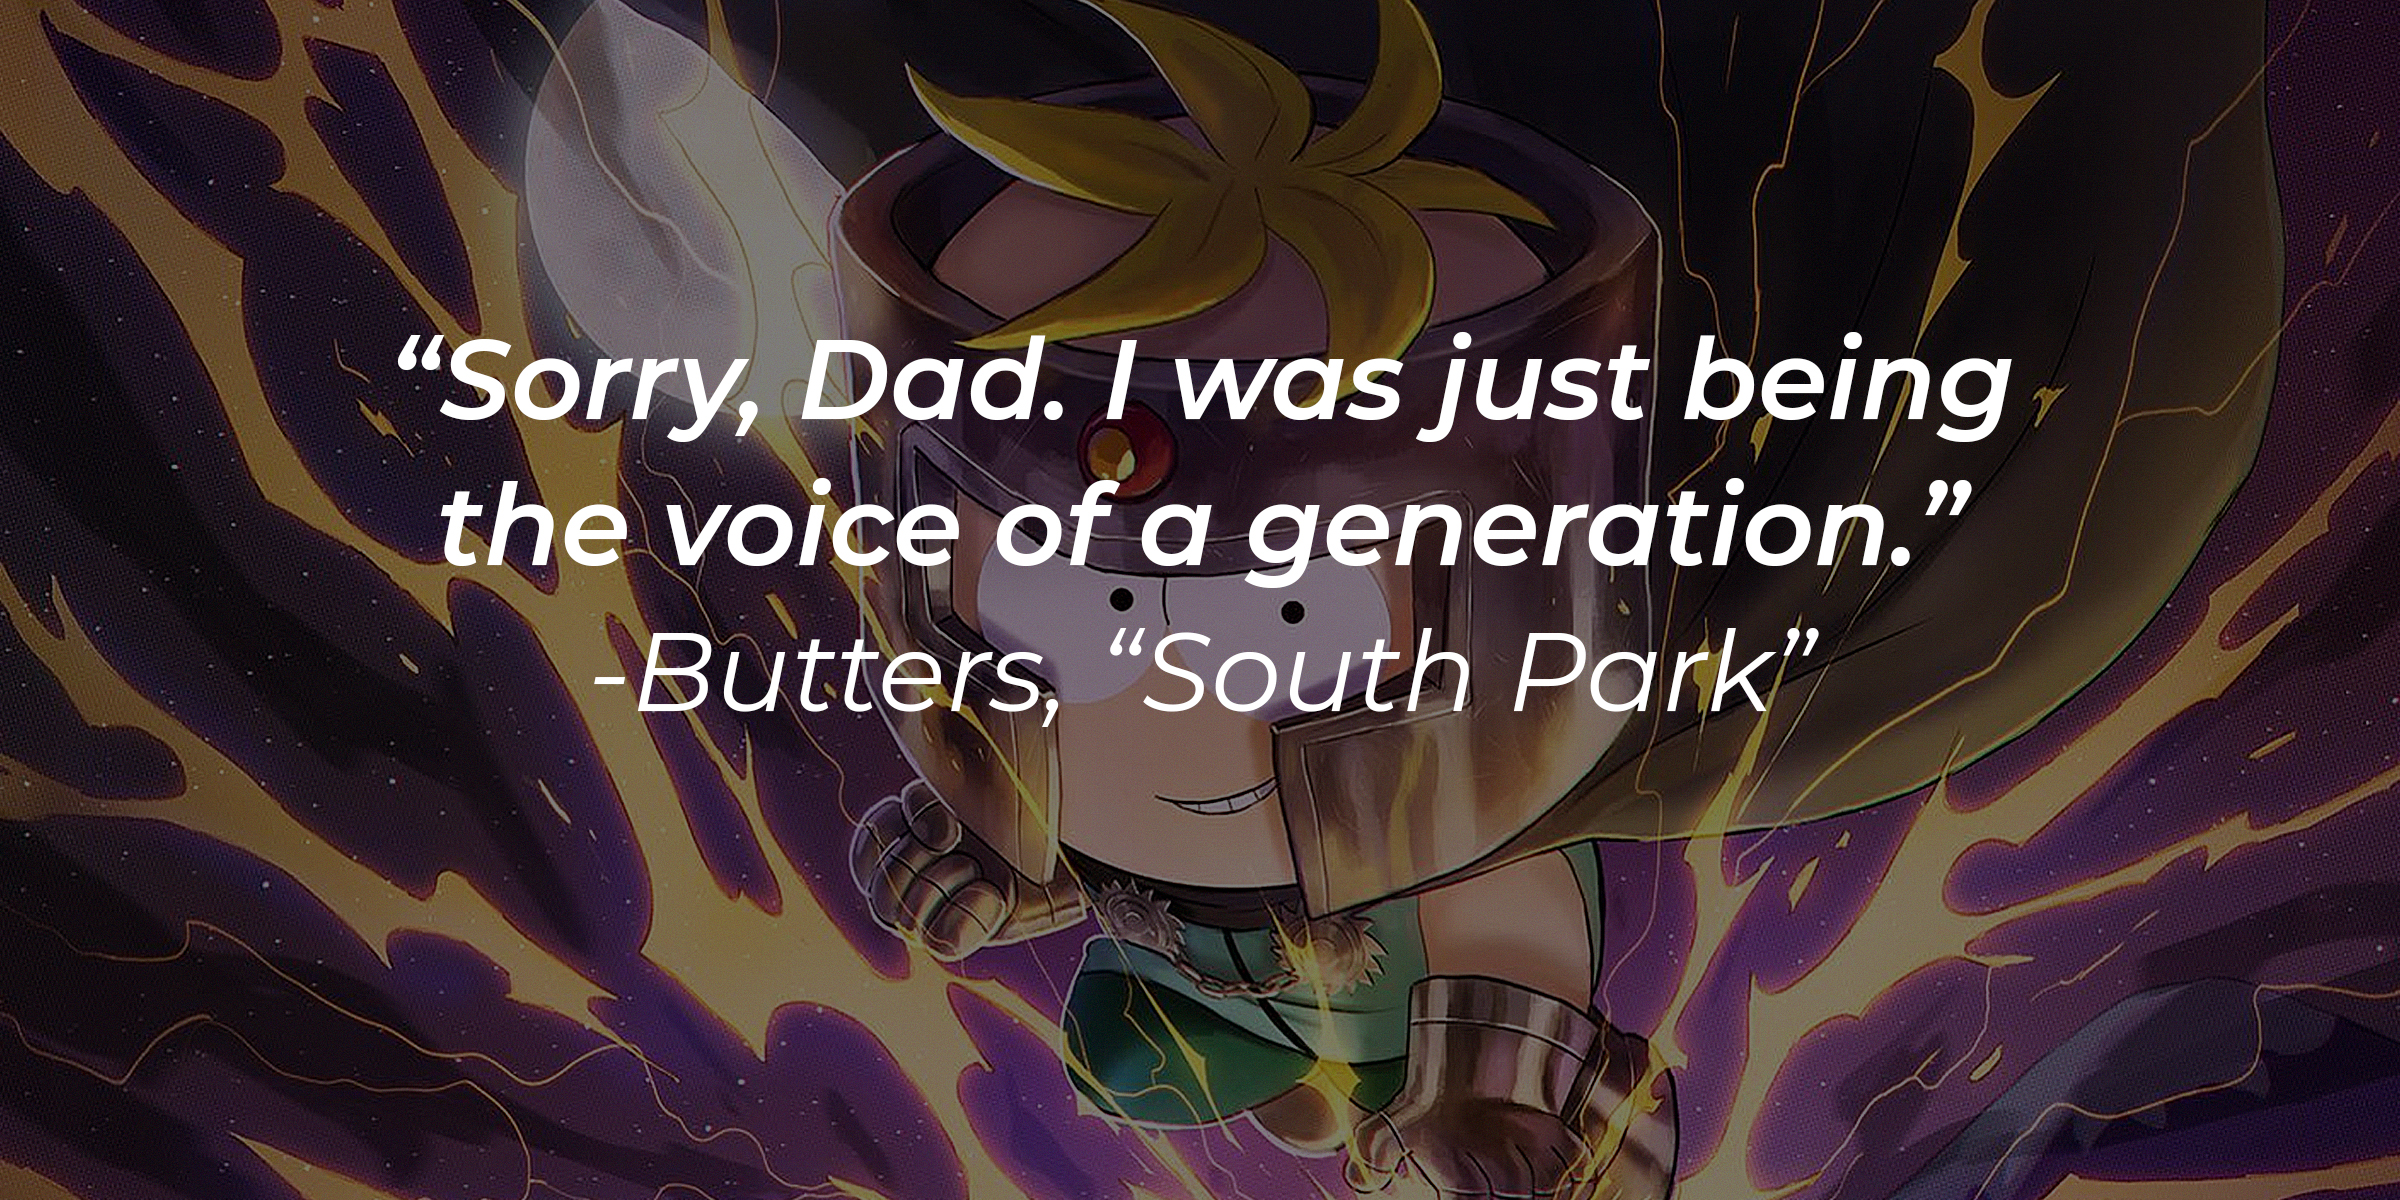 An image of Butters in "South Park" with his quote: "Sorry, Dad. I was just being the voice of a generation." | Source: facebook.com/southpark